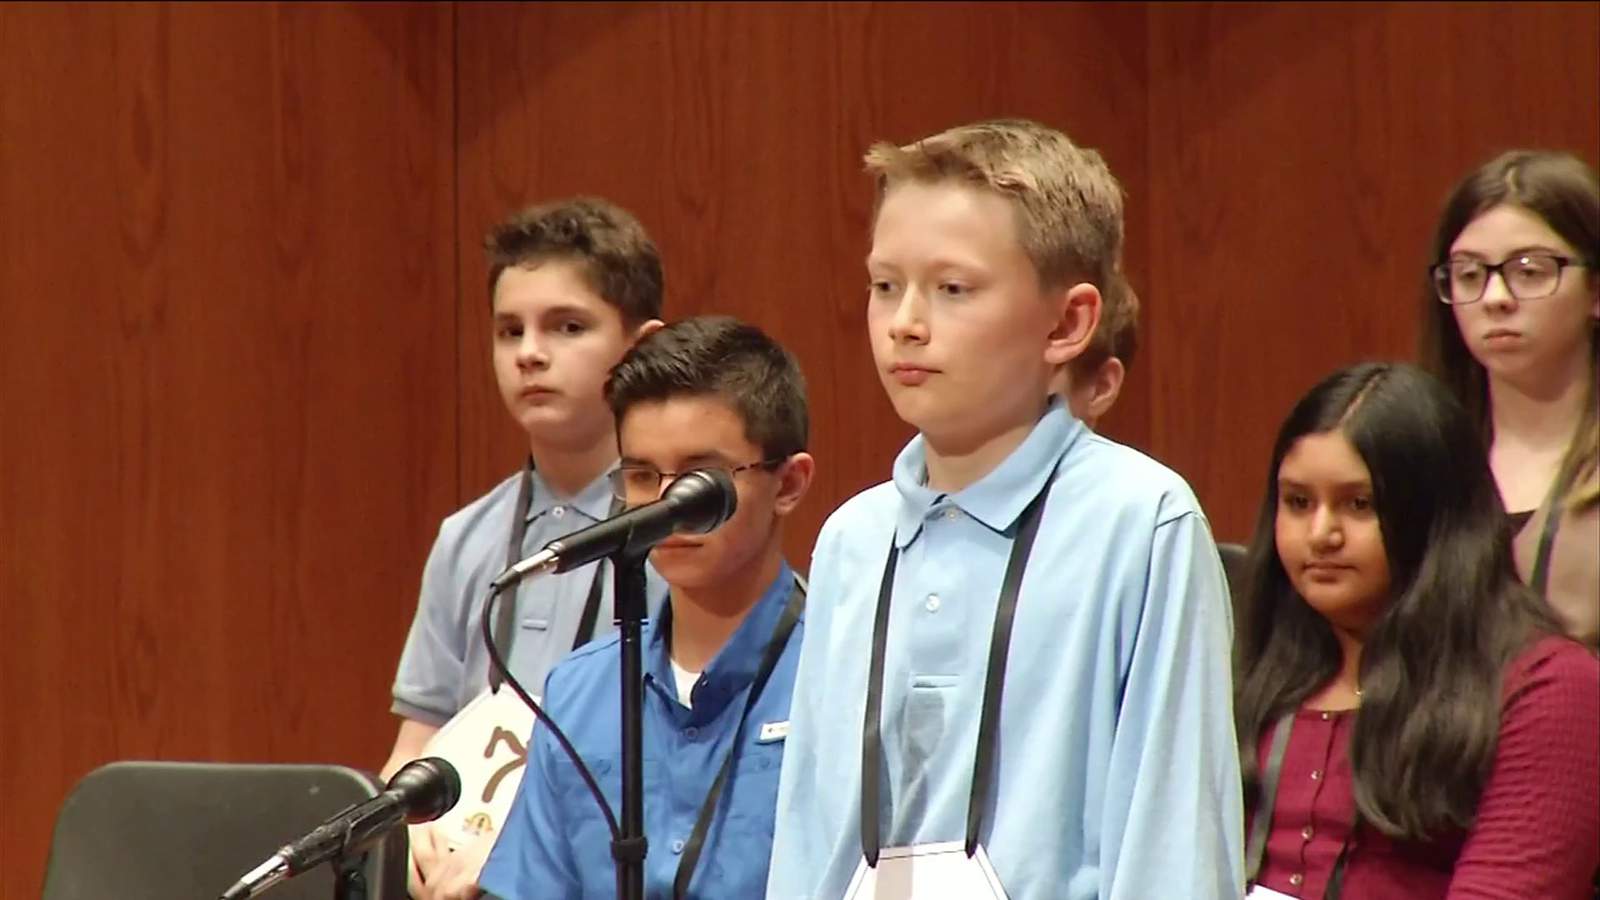 Back-to-back: Erik Williams again crowned champion of First Coast Spelling Bee